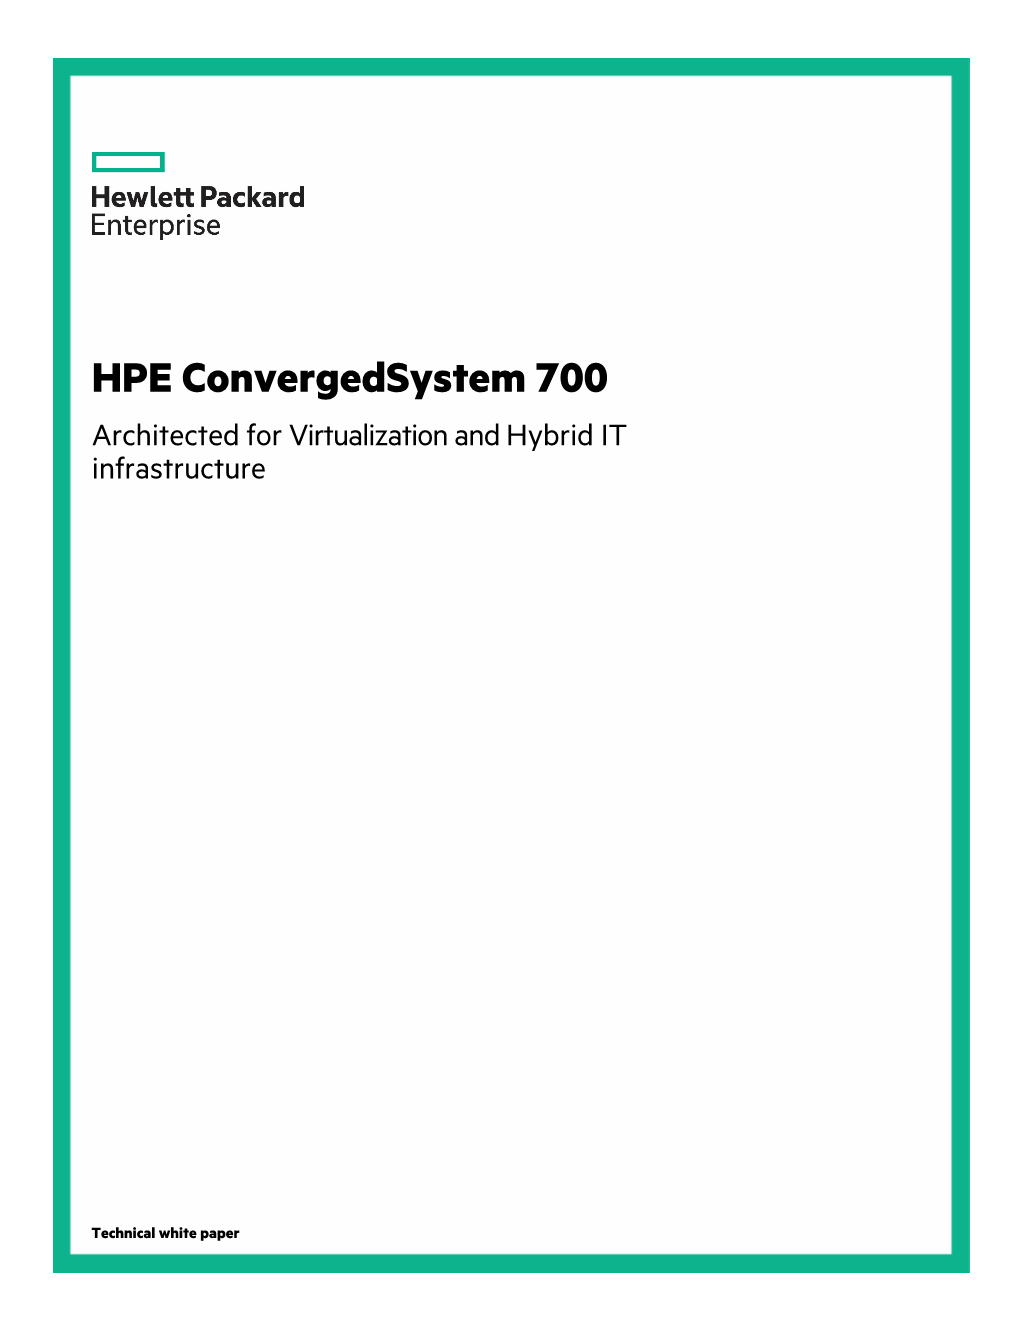 HPE Convergedsystem 700 Architected for Virtualization and Hybrid IT Infrastructure